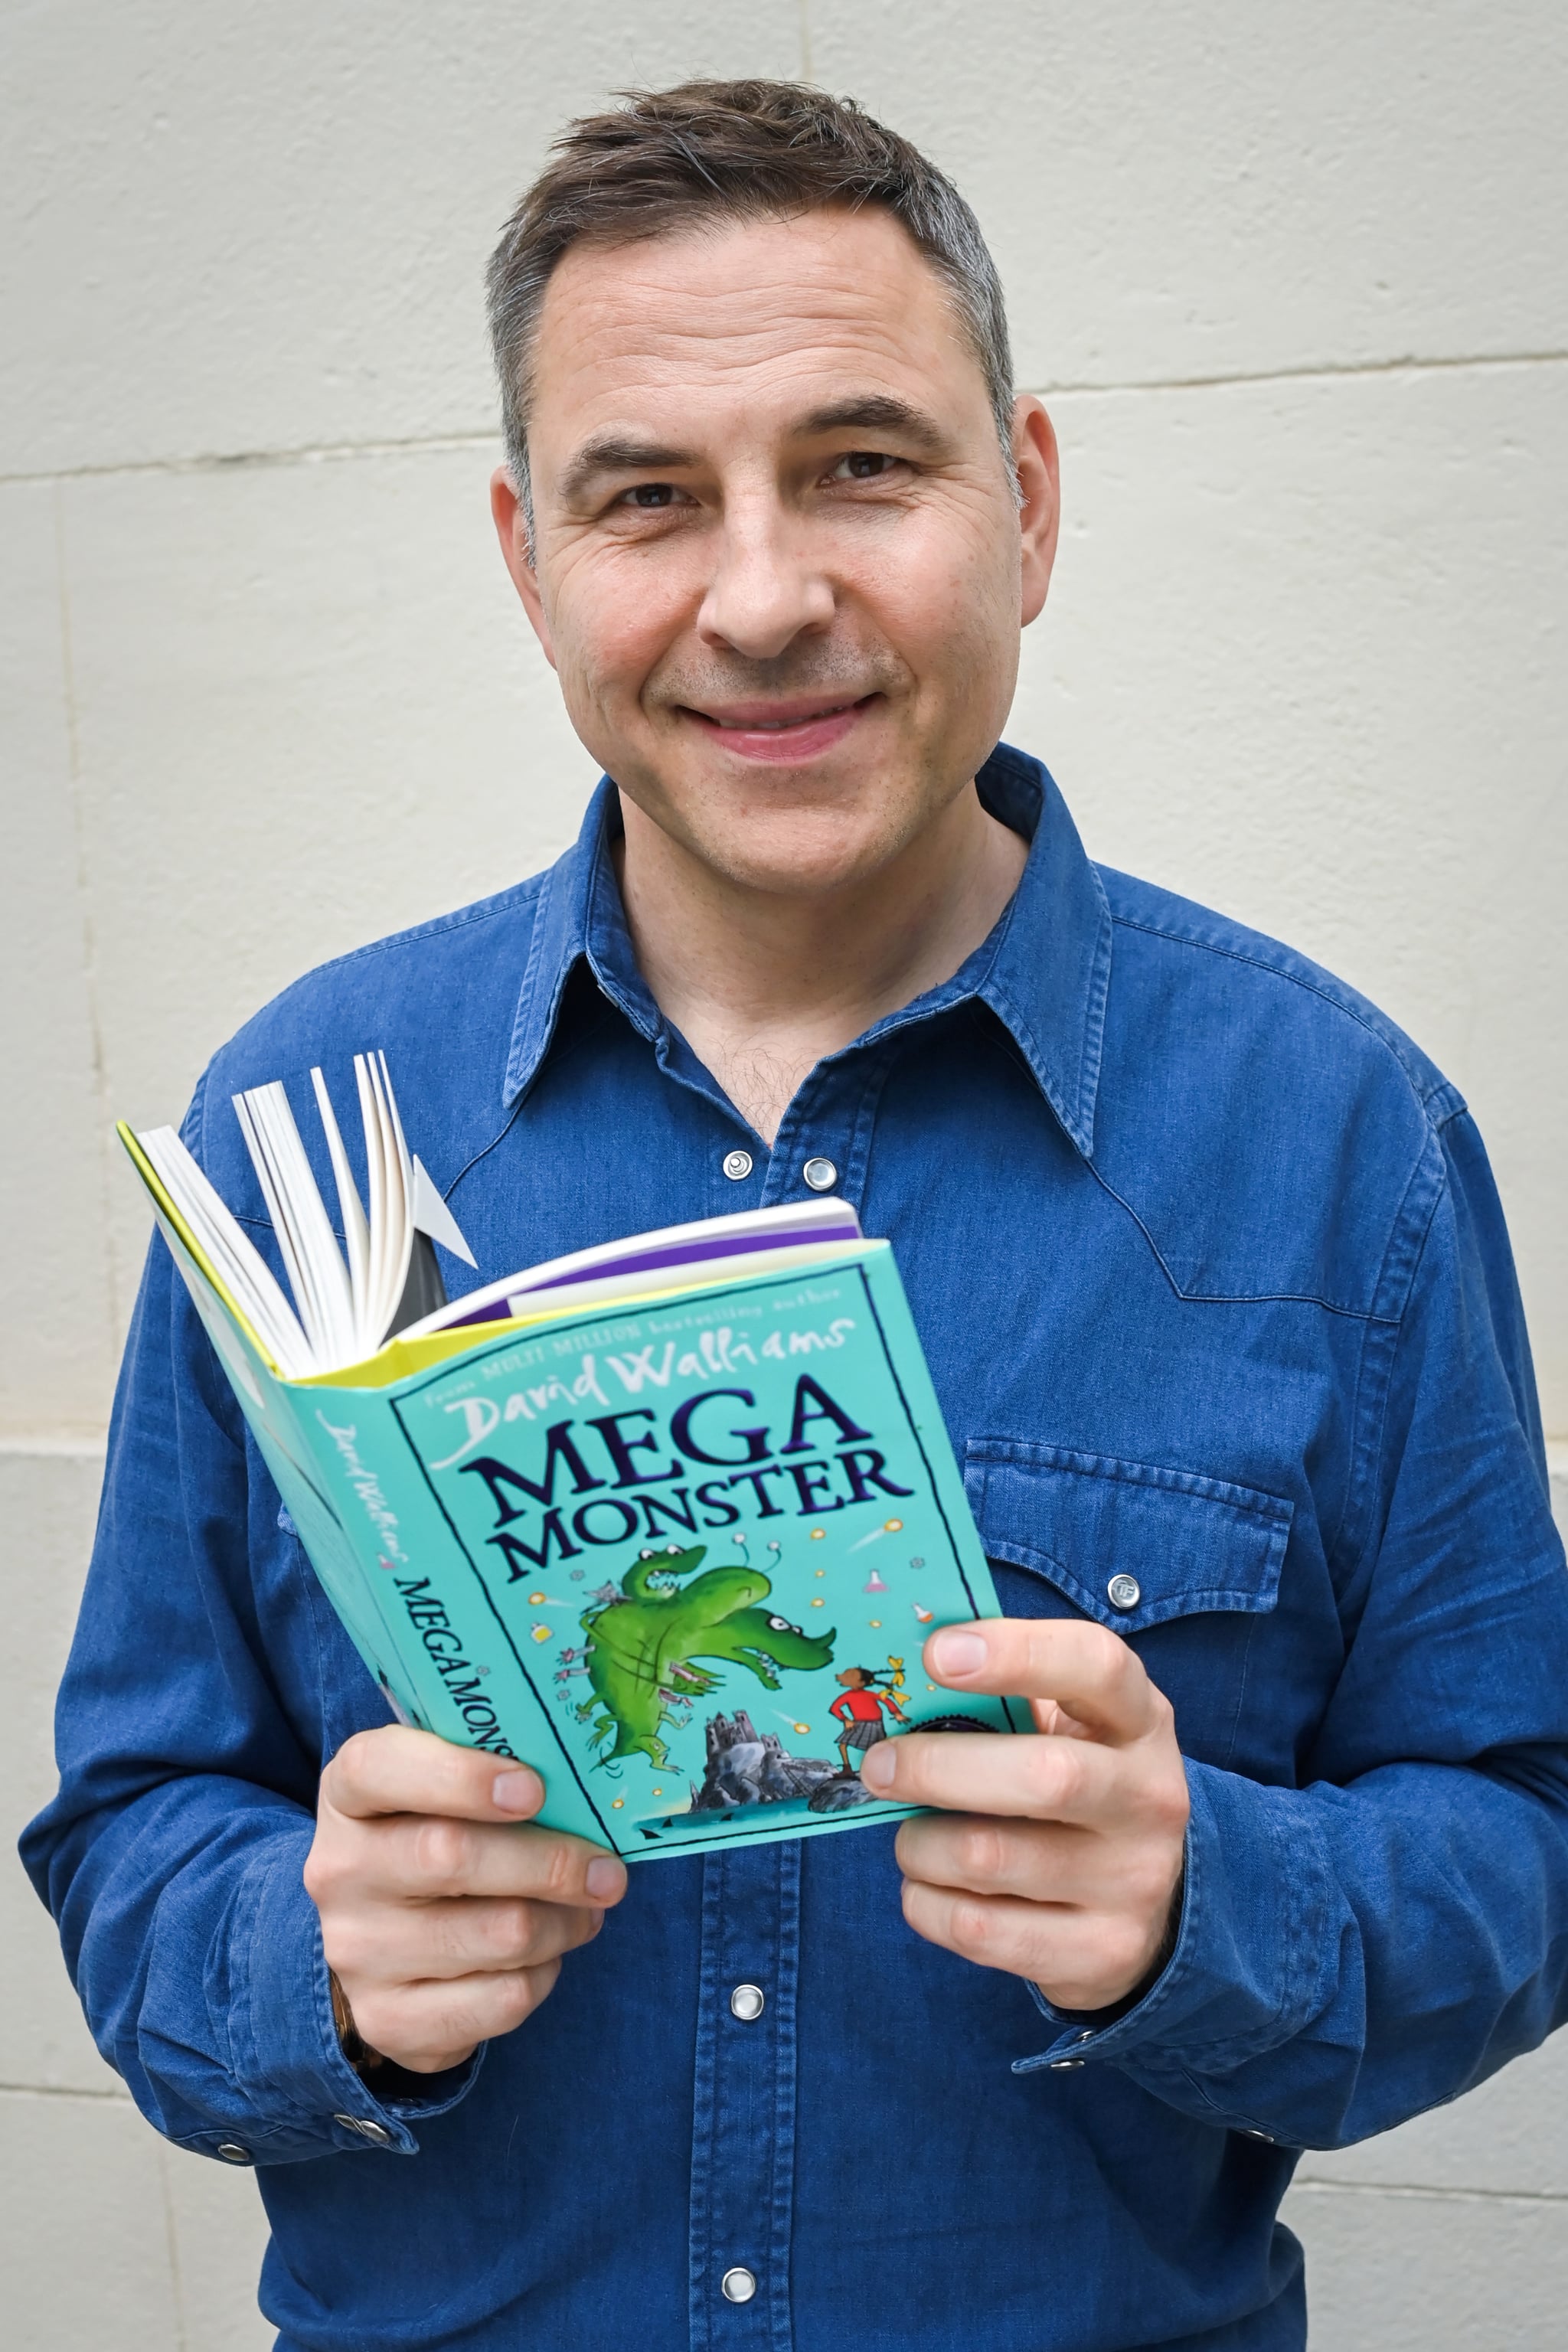 LONDON, ENGLAND - JULY 14: In this image released on July 14th, David Walliams poses to mark his book 